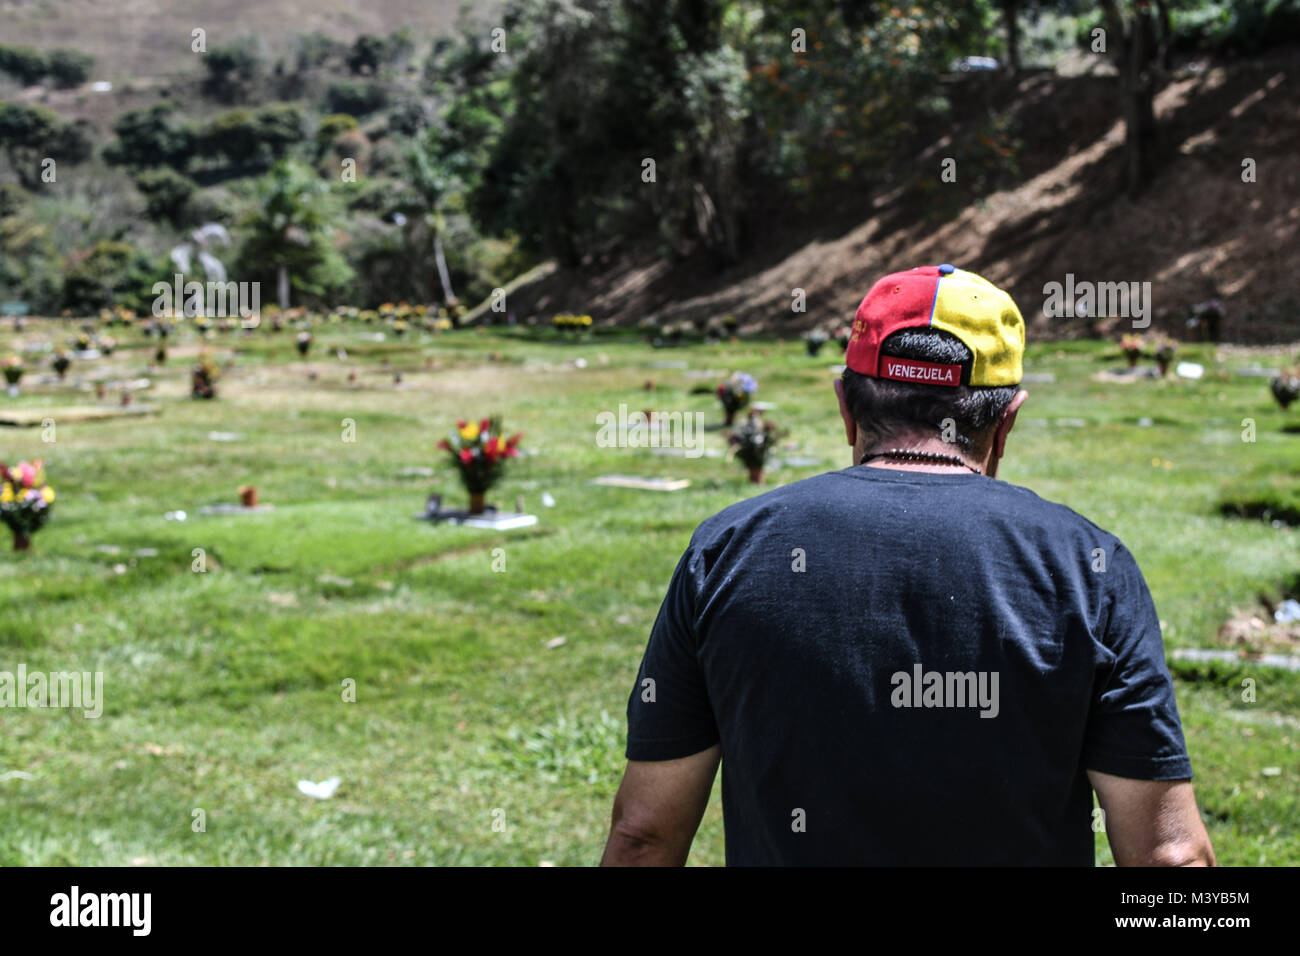 Caracas, Miranda, Venezuela. 12th Feb, 2018. Remembrance service held in Caracas in honor of those killed during the protests in Venezuela. Group of people marched to the eastern cemetery with relatives of the victims who have died protesting since 2014. Credit: RomÃ¡N Camacho/SOPA/ZUMA Wire/Alamy Live News Stock Photo